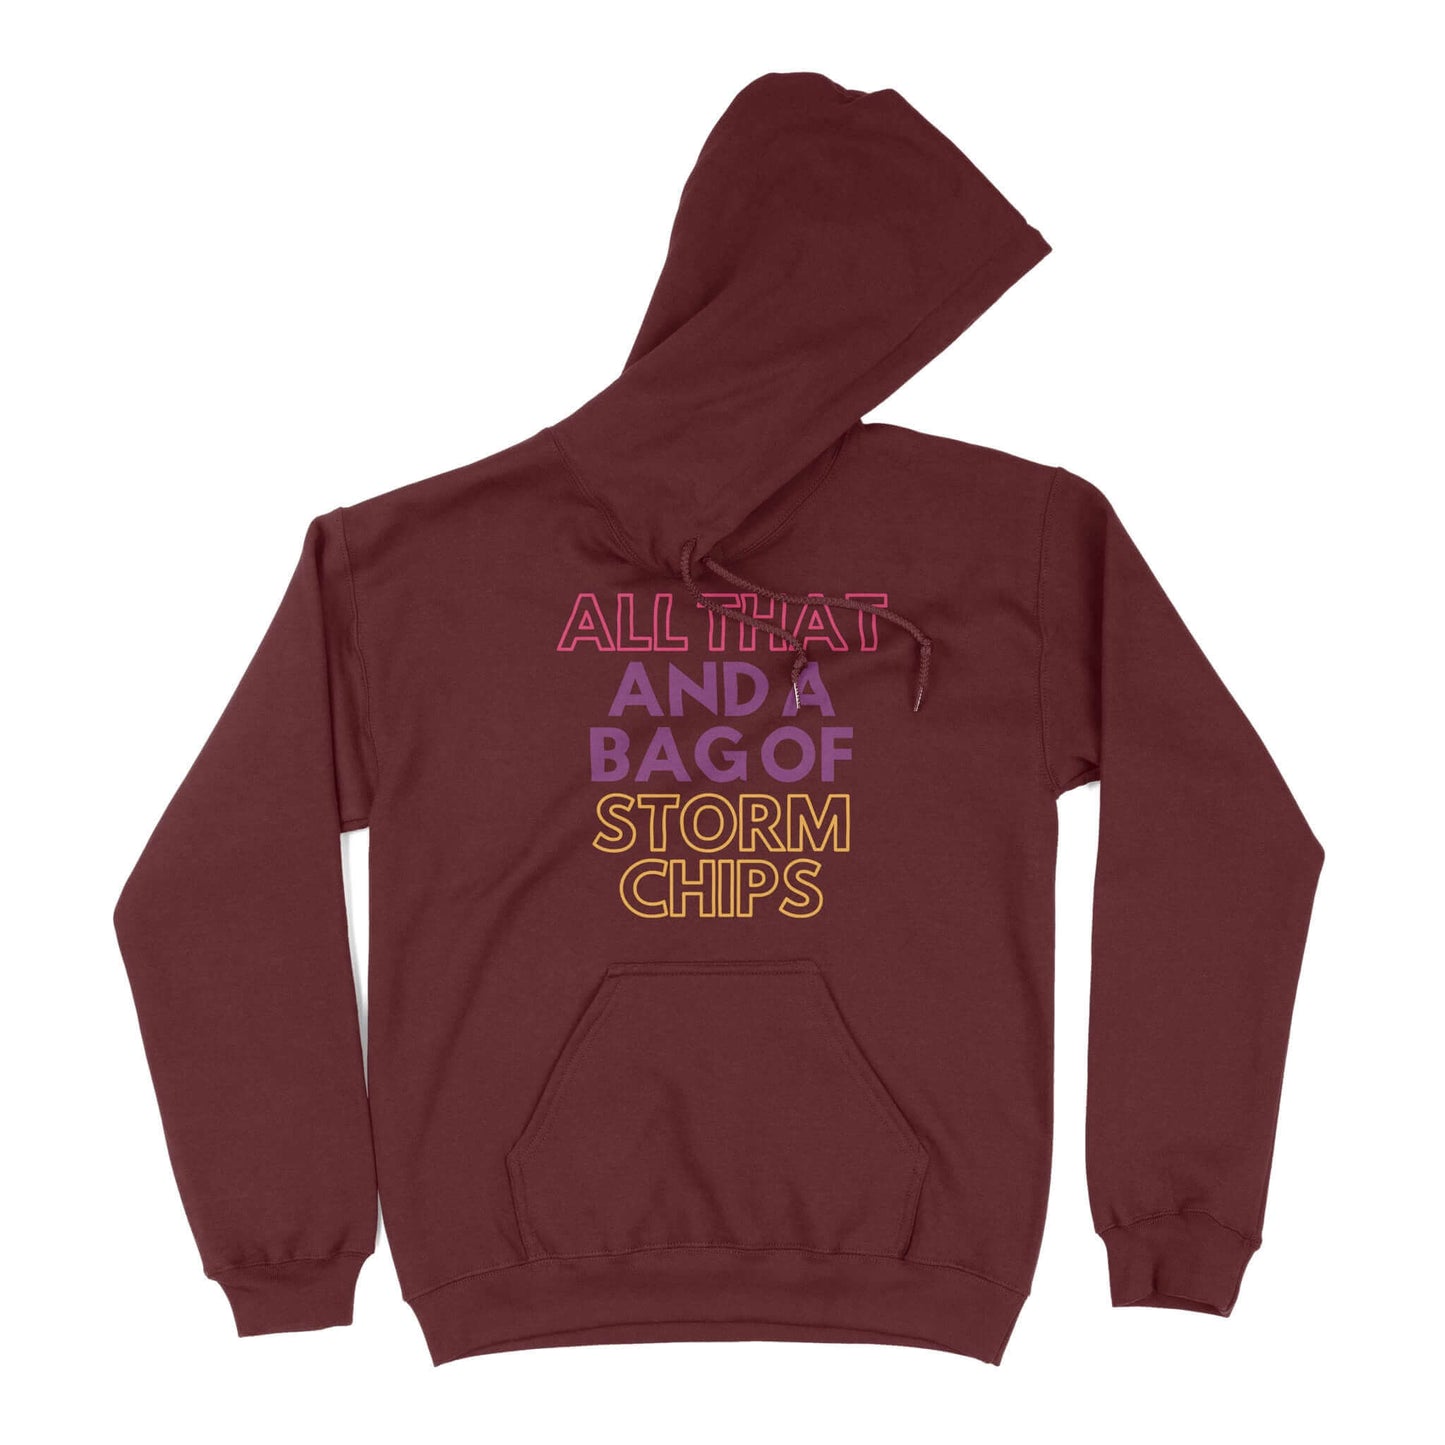 All That and a Bag of Storm Chips Unisex Hoodie in Color: Maroon - East Coast AF Apparel